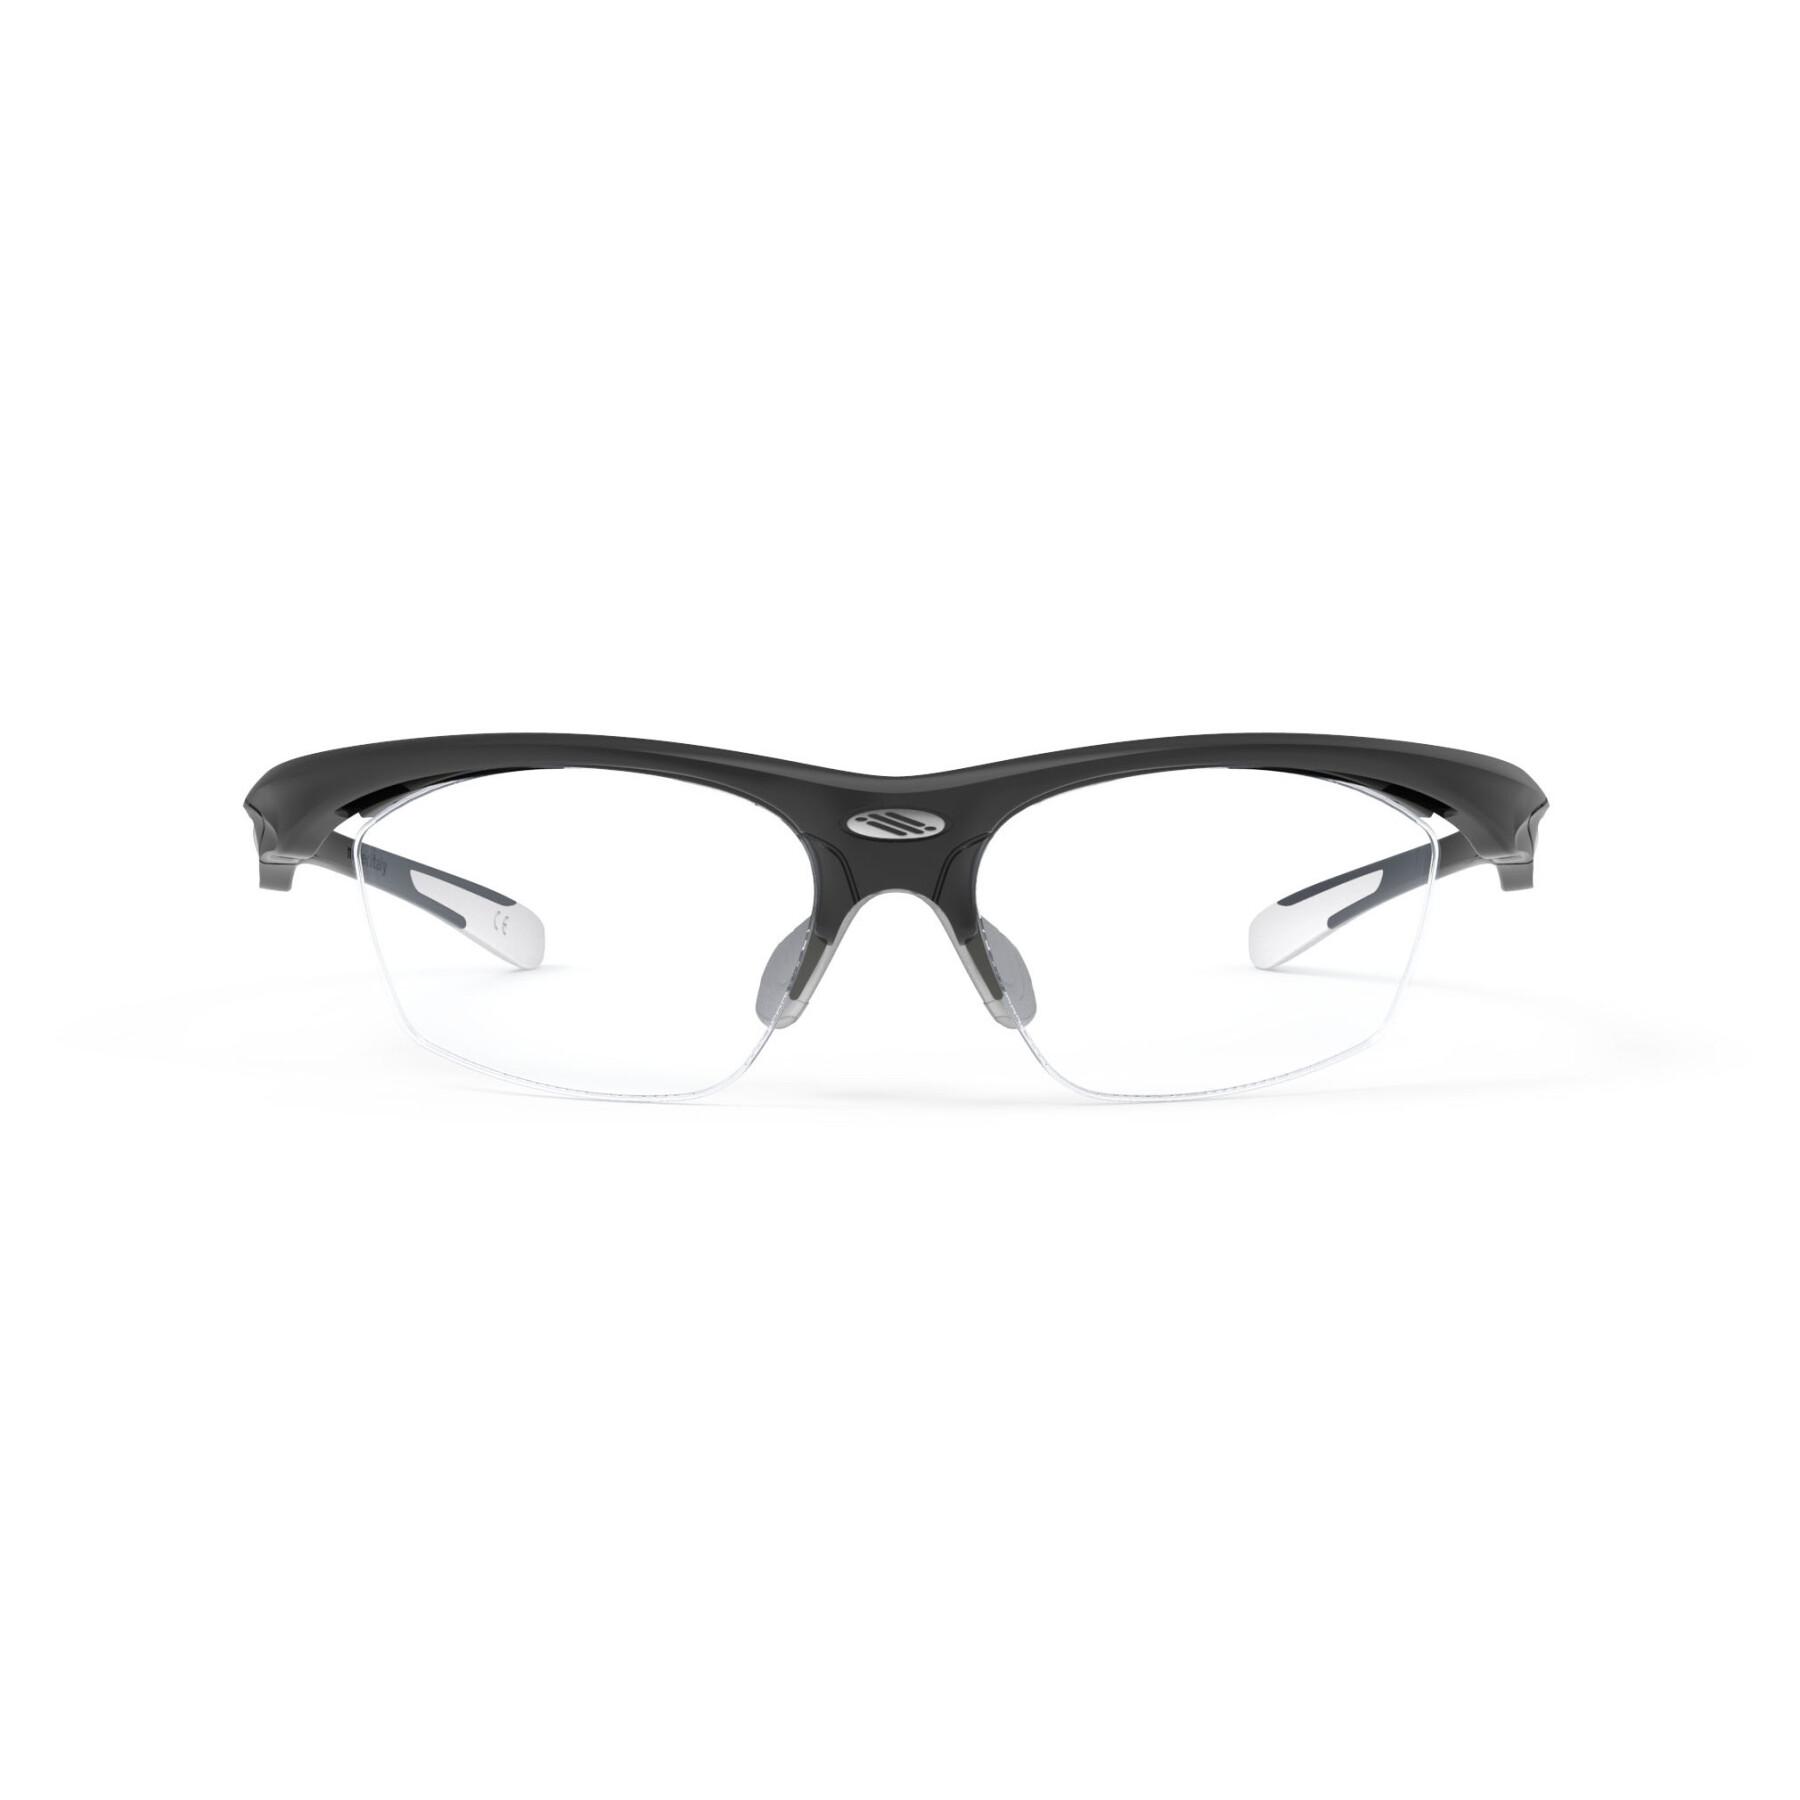 Lunettes de performance Rudy Project stratofly rx solution